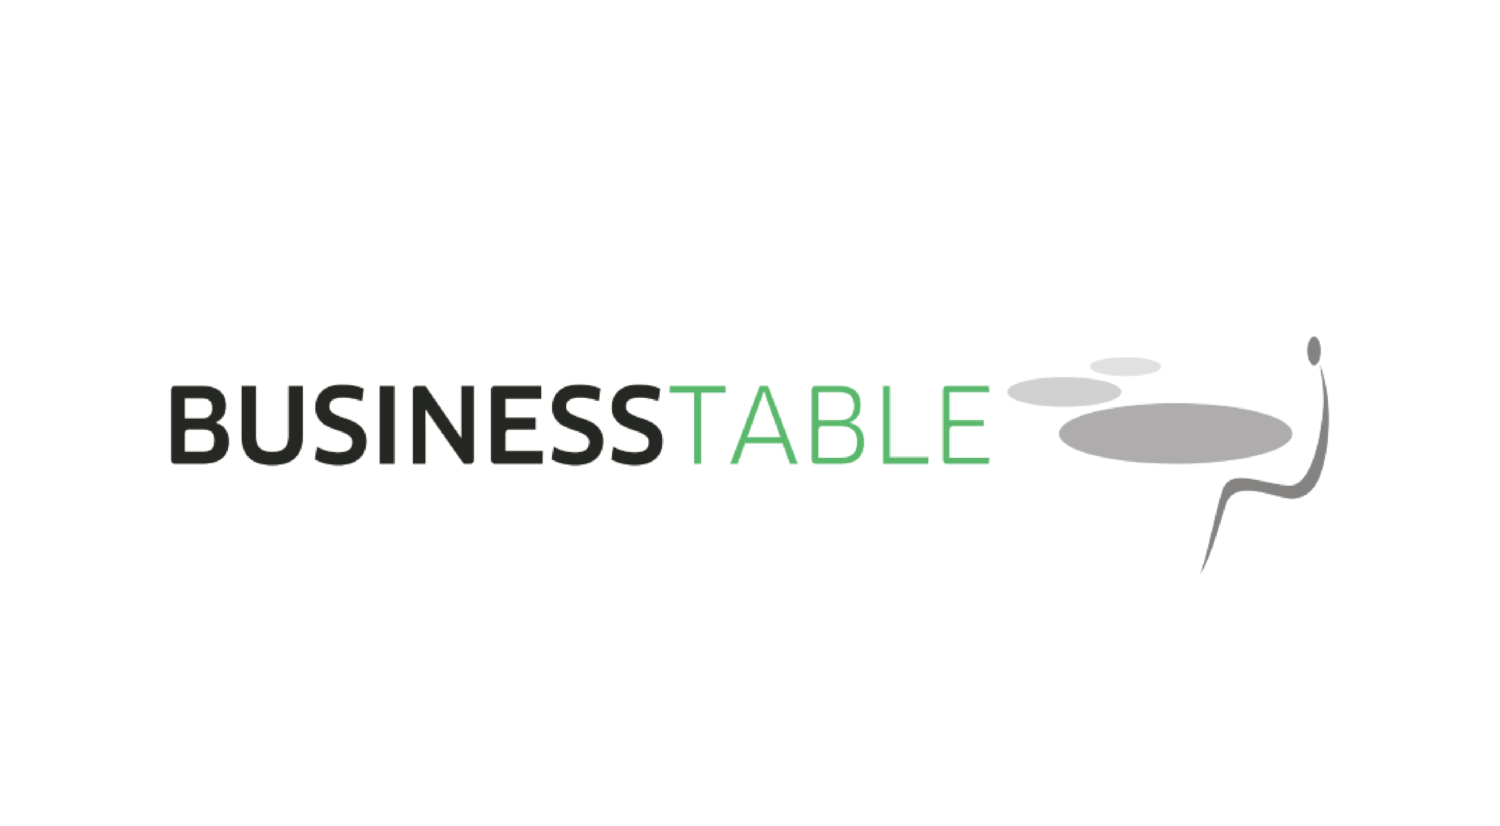 BUSINESS TABLE